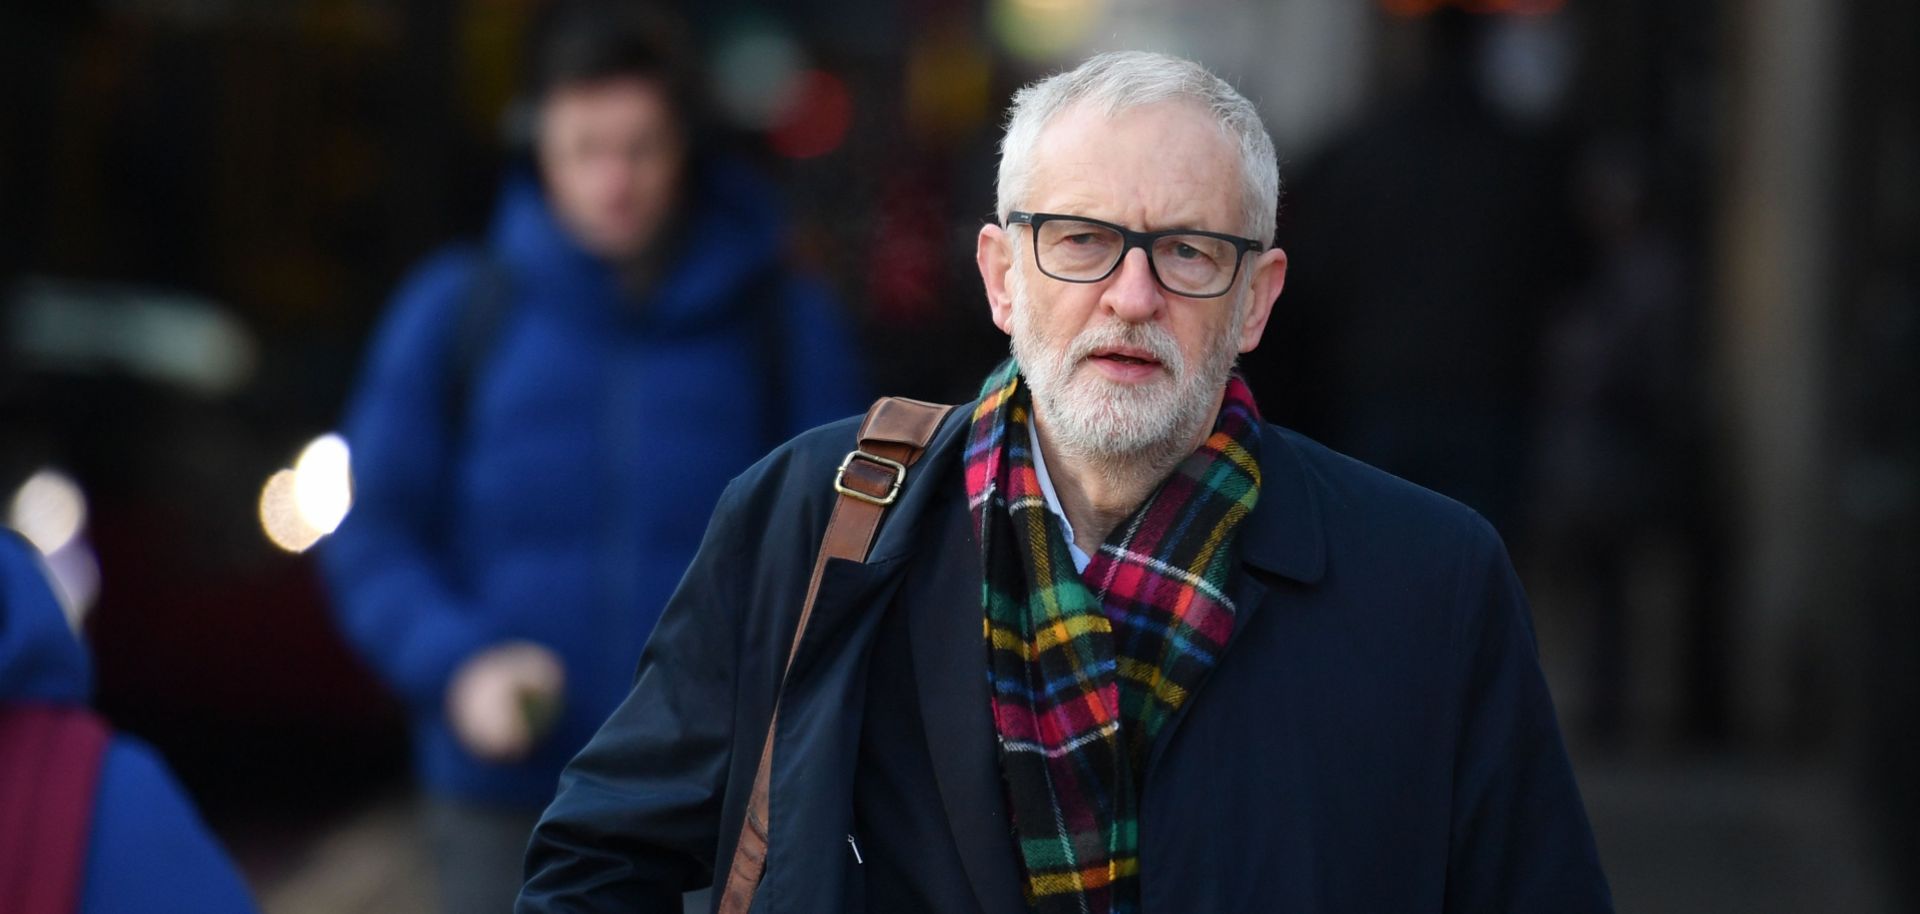 Labour Party leader Jeremy Corbyn campaigns outside Finsbury Park station in London on Dec. 2, 2019.